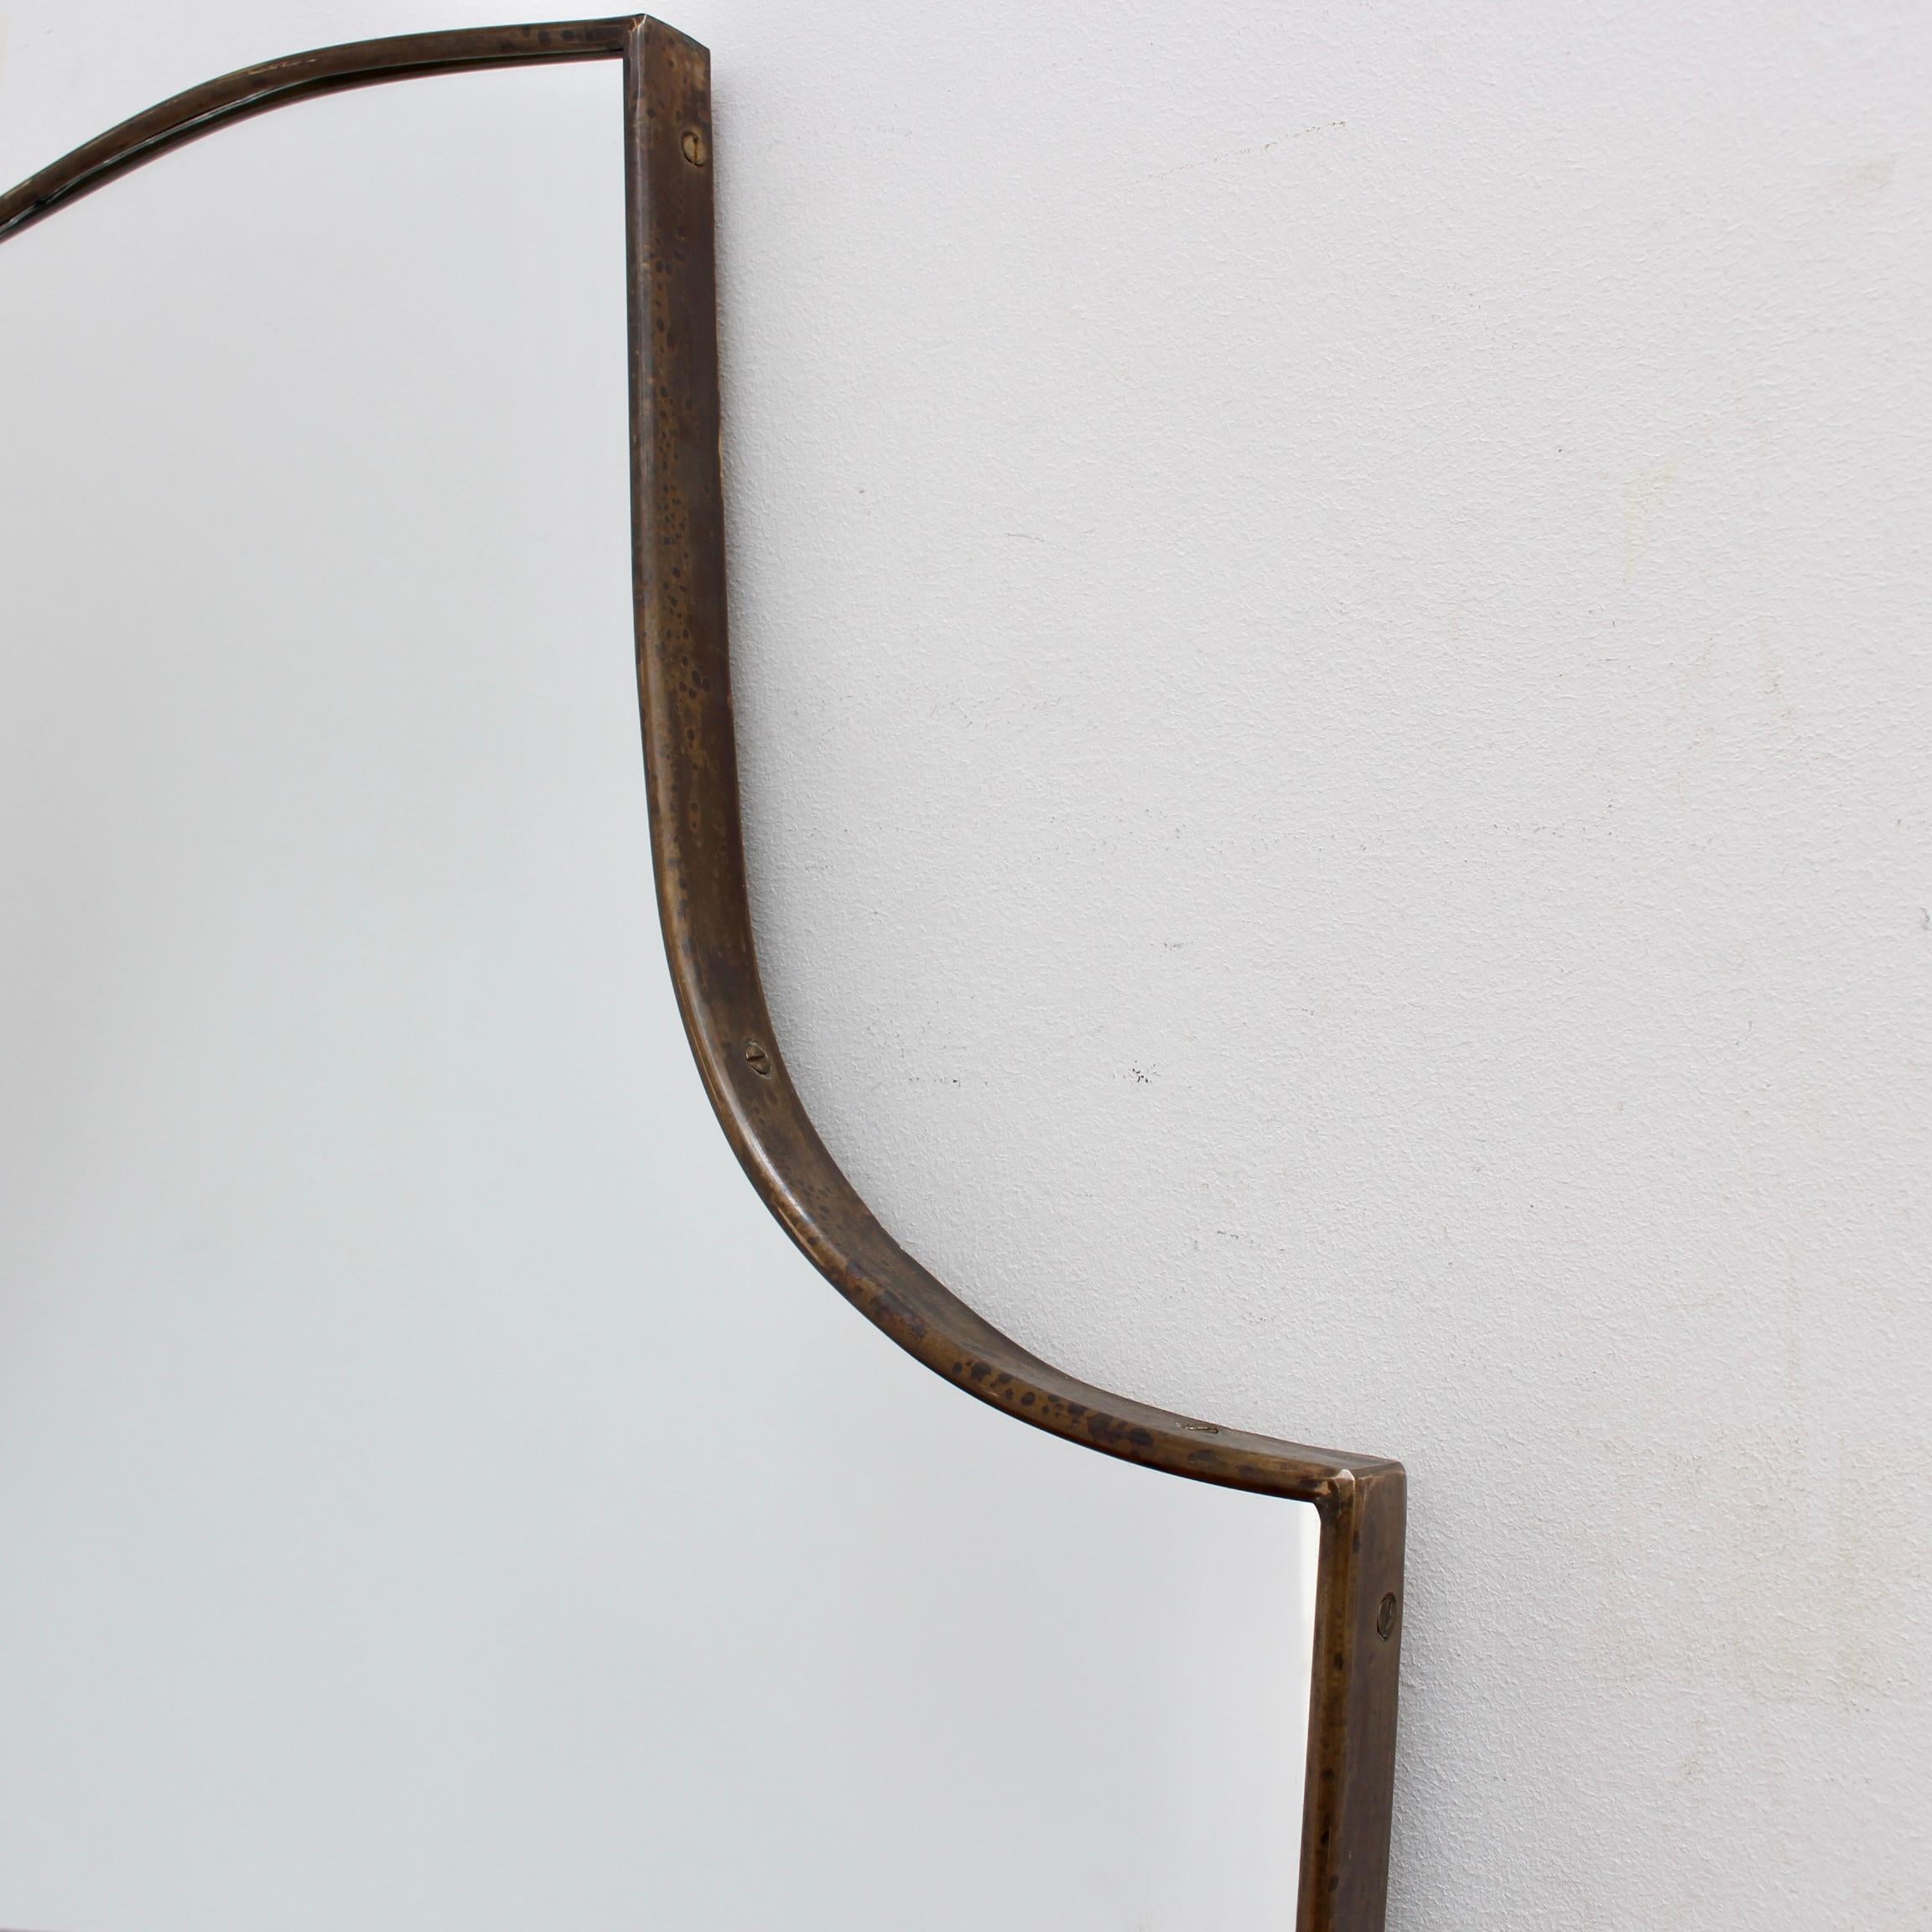 Vintage Italian Wall Mirror with Brass Frame (circa 1960s) - Large For Sale 6